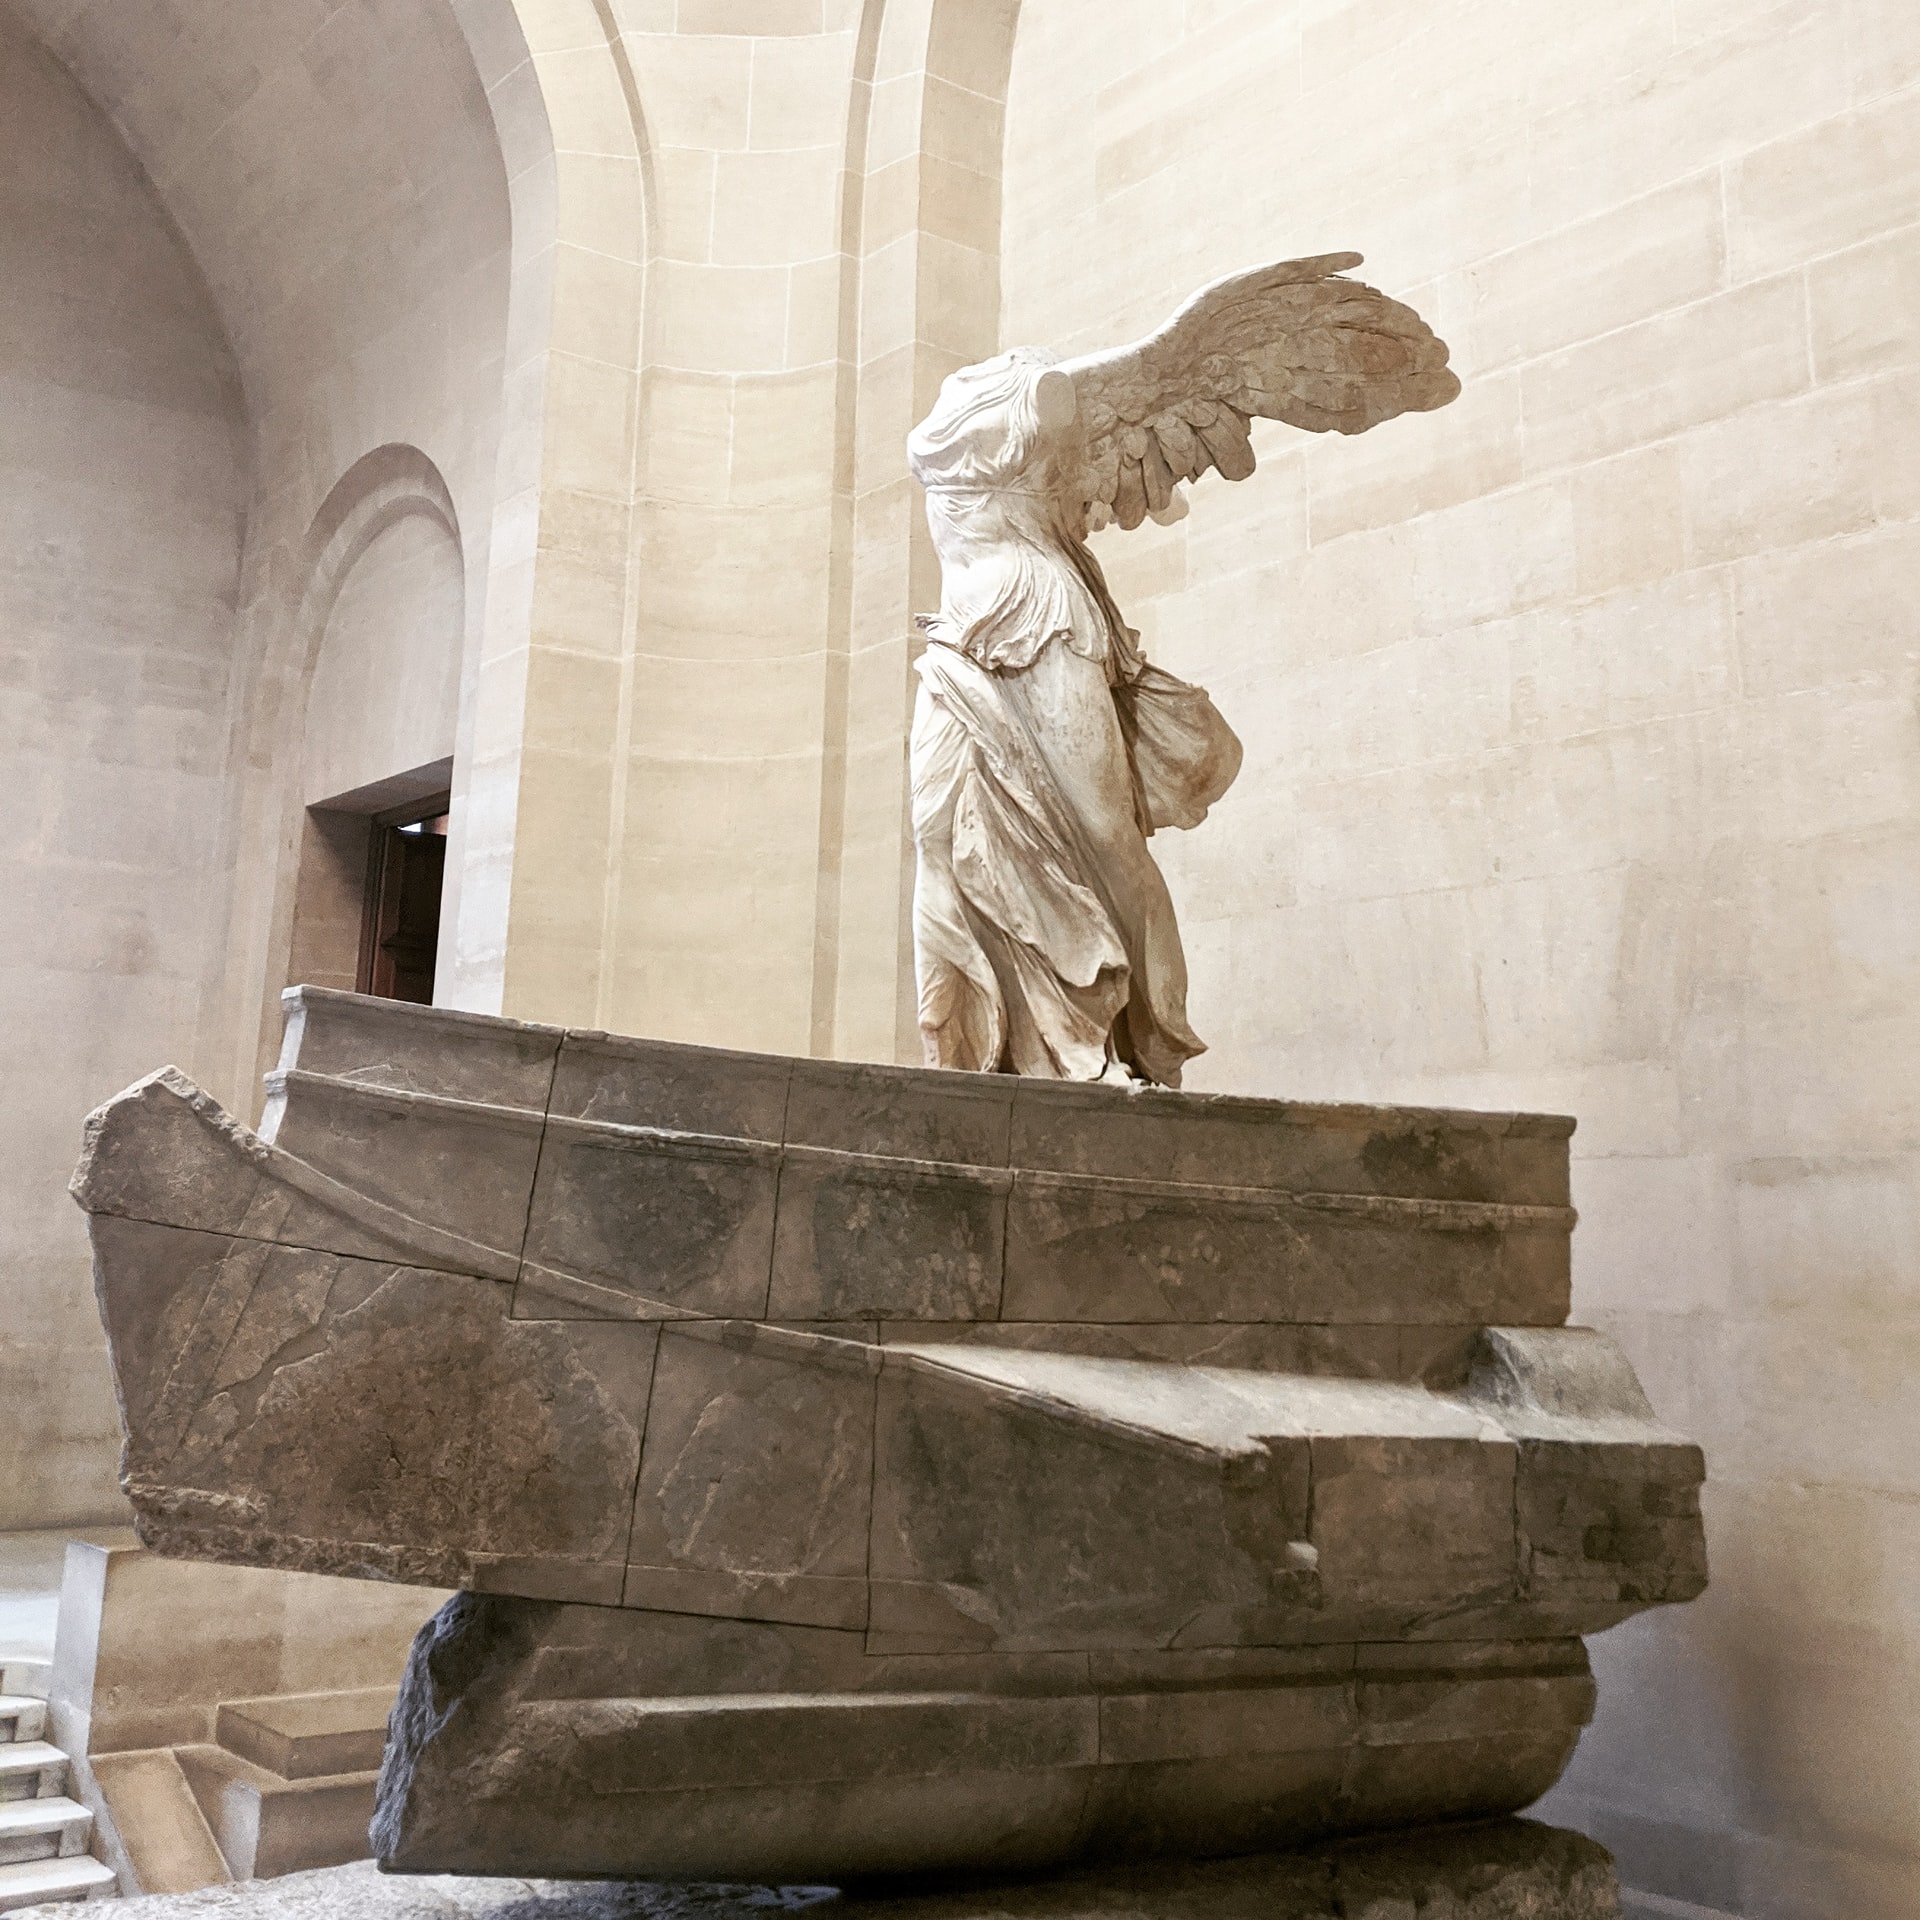 Winged statue at the Louvre